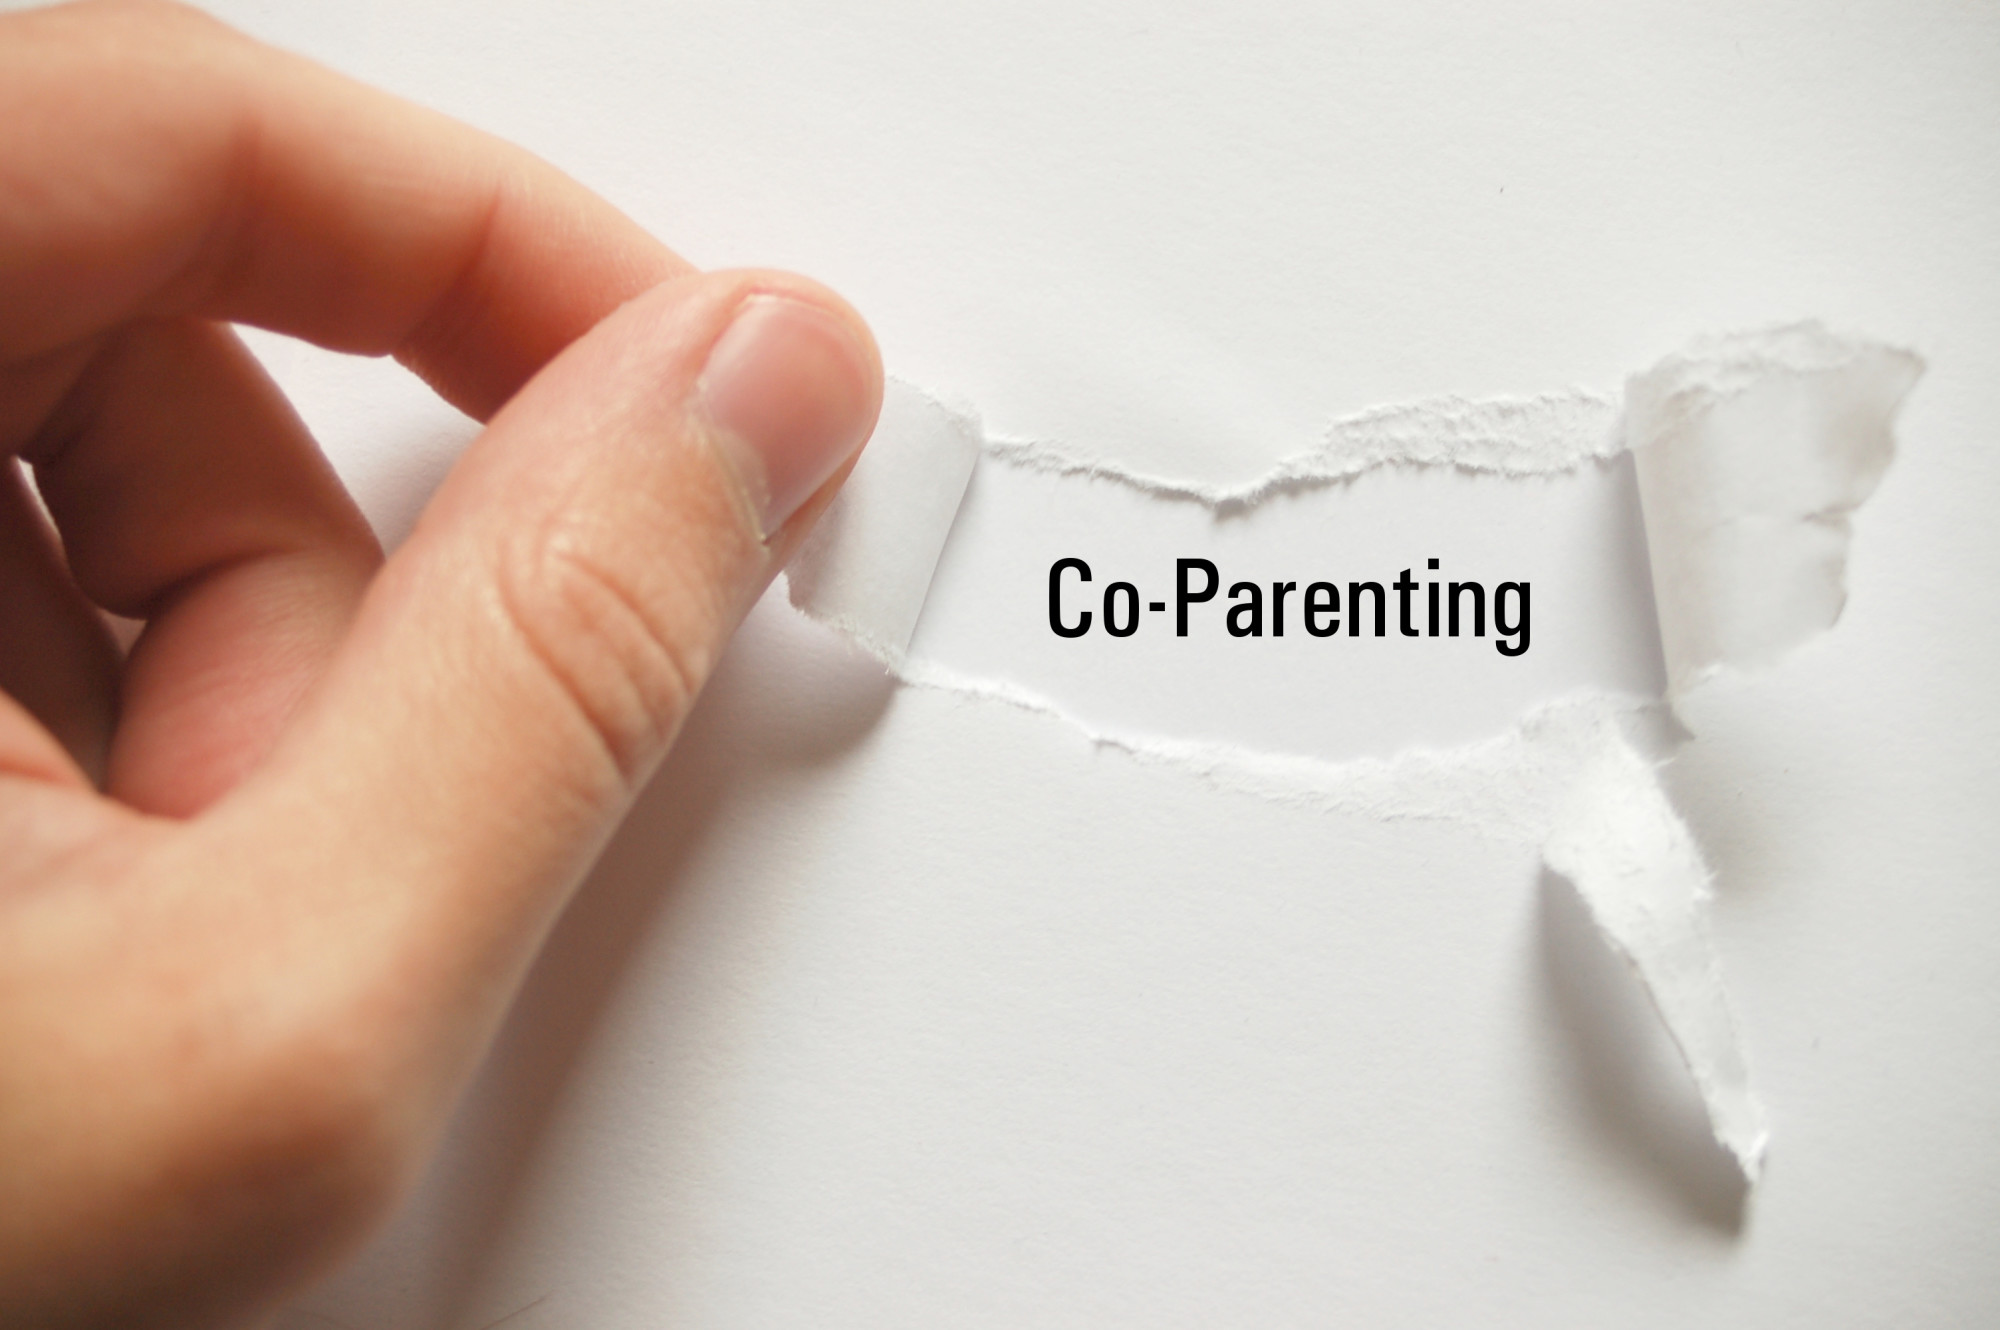 co-parenting tips for seperated or divorced parents